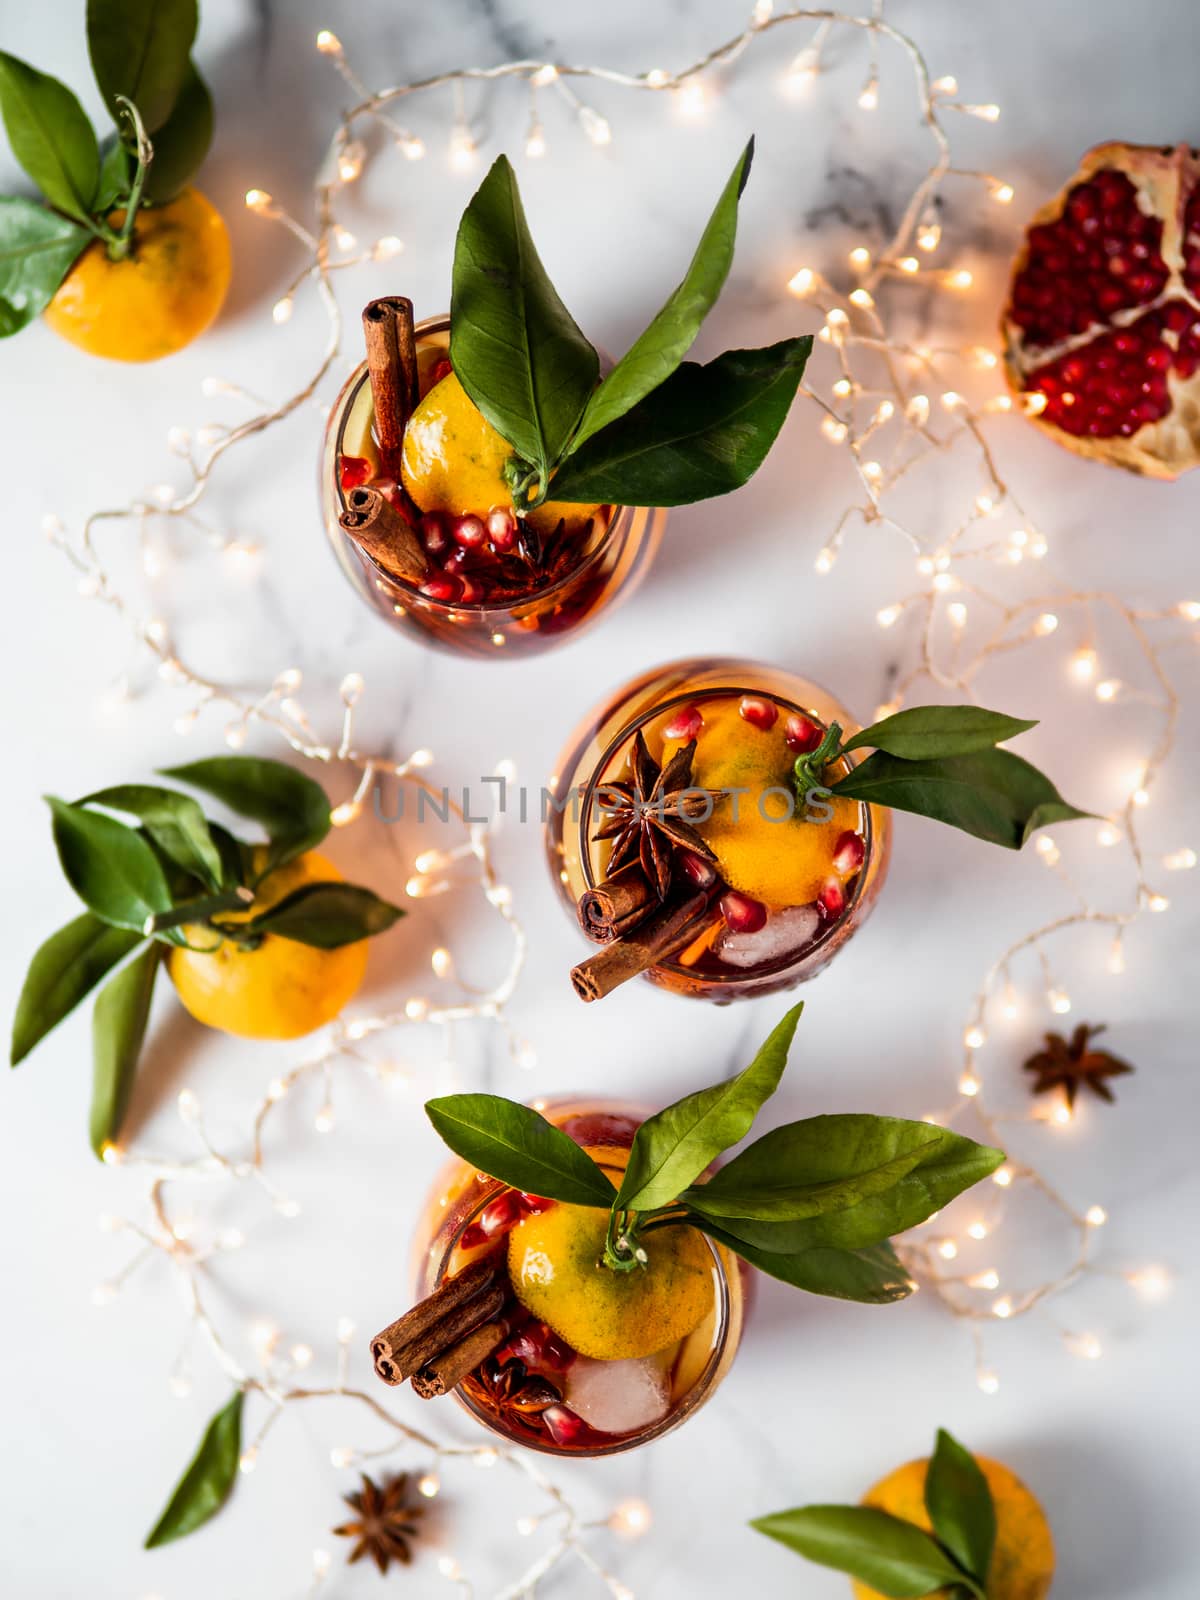 Winter sangria on white marble background. Holiday sangria in glasses with fruit slice, pomegranate and spices on decoration lighting chain tabletop. Top view or flat lay. Vertical.